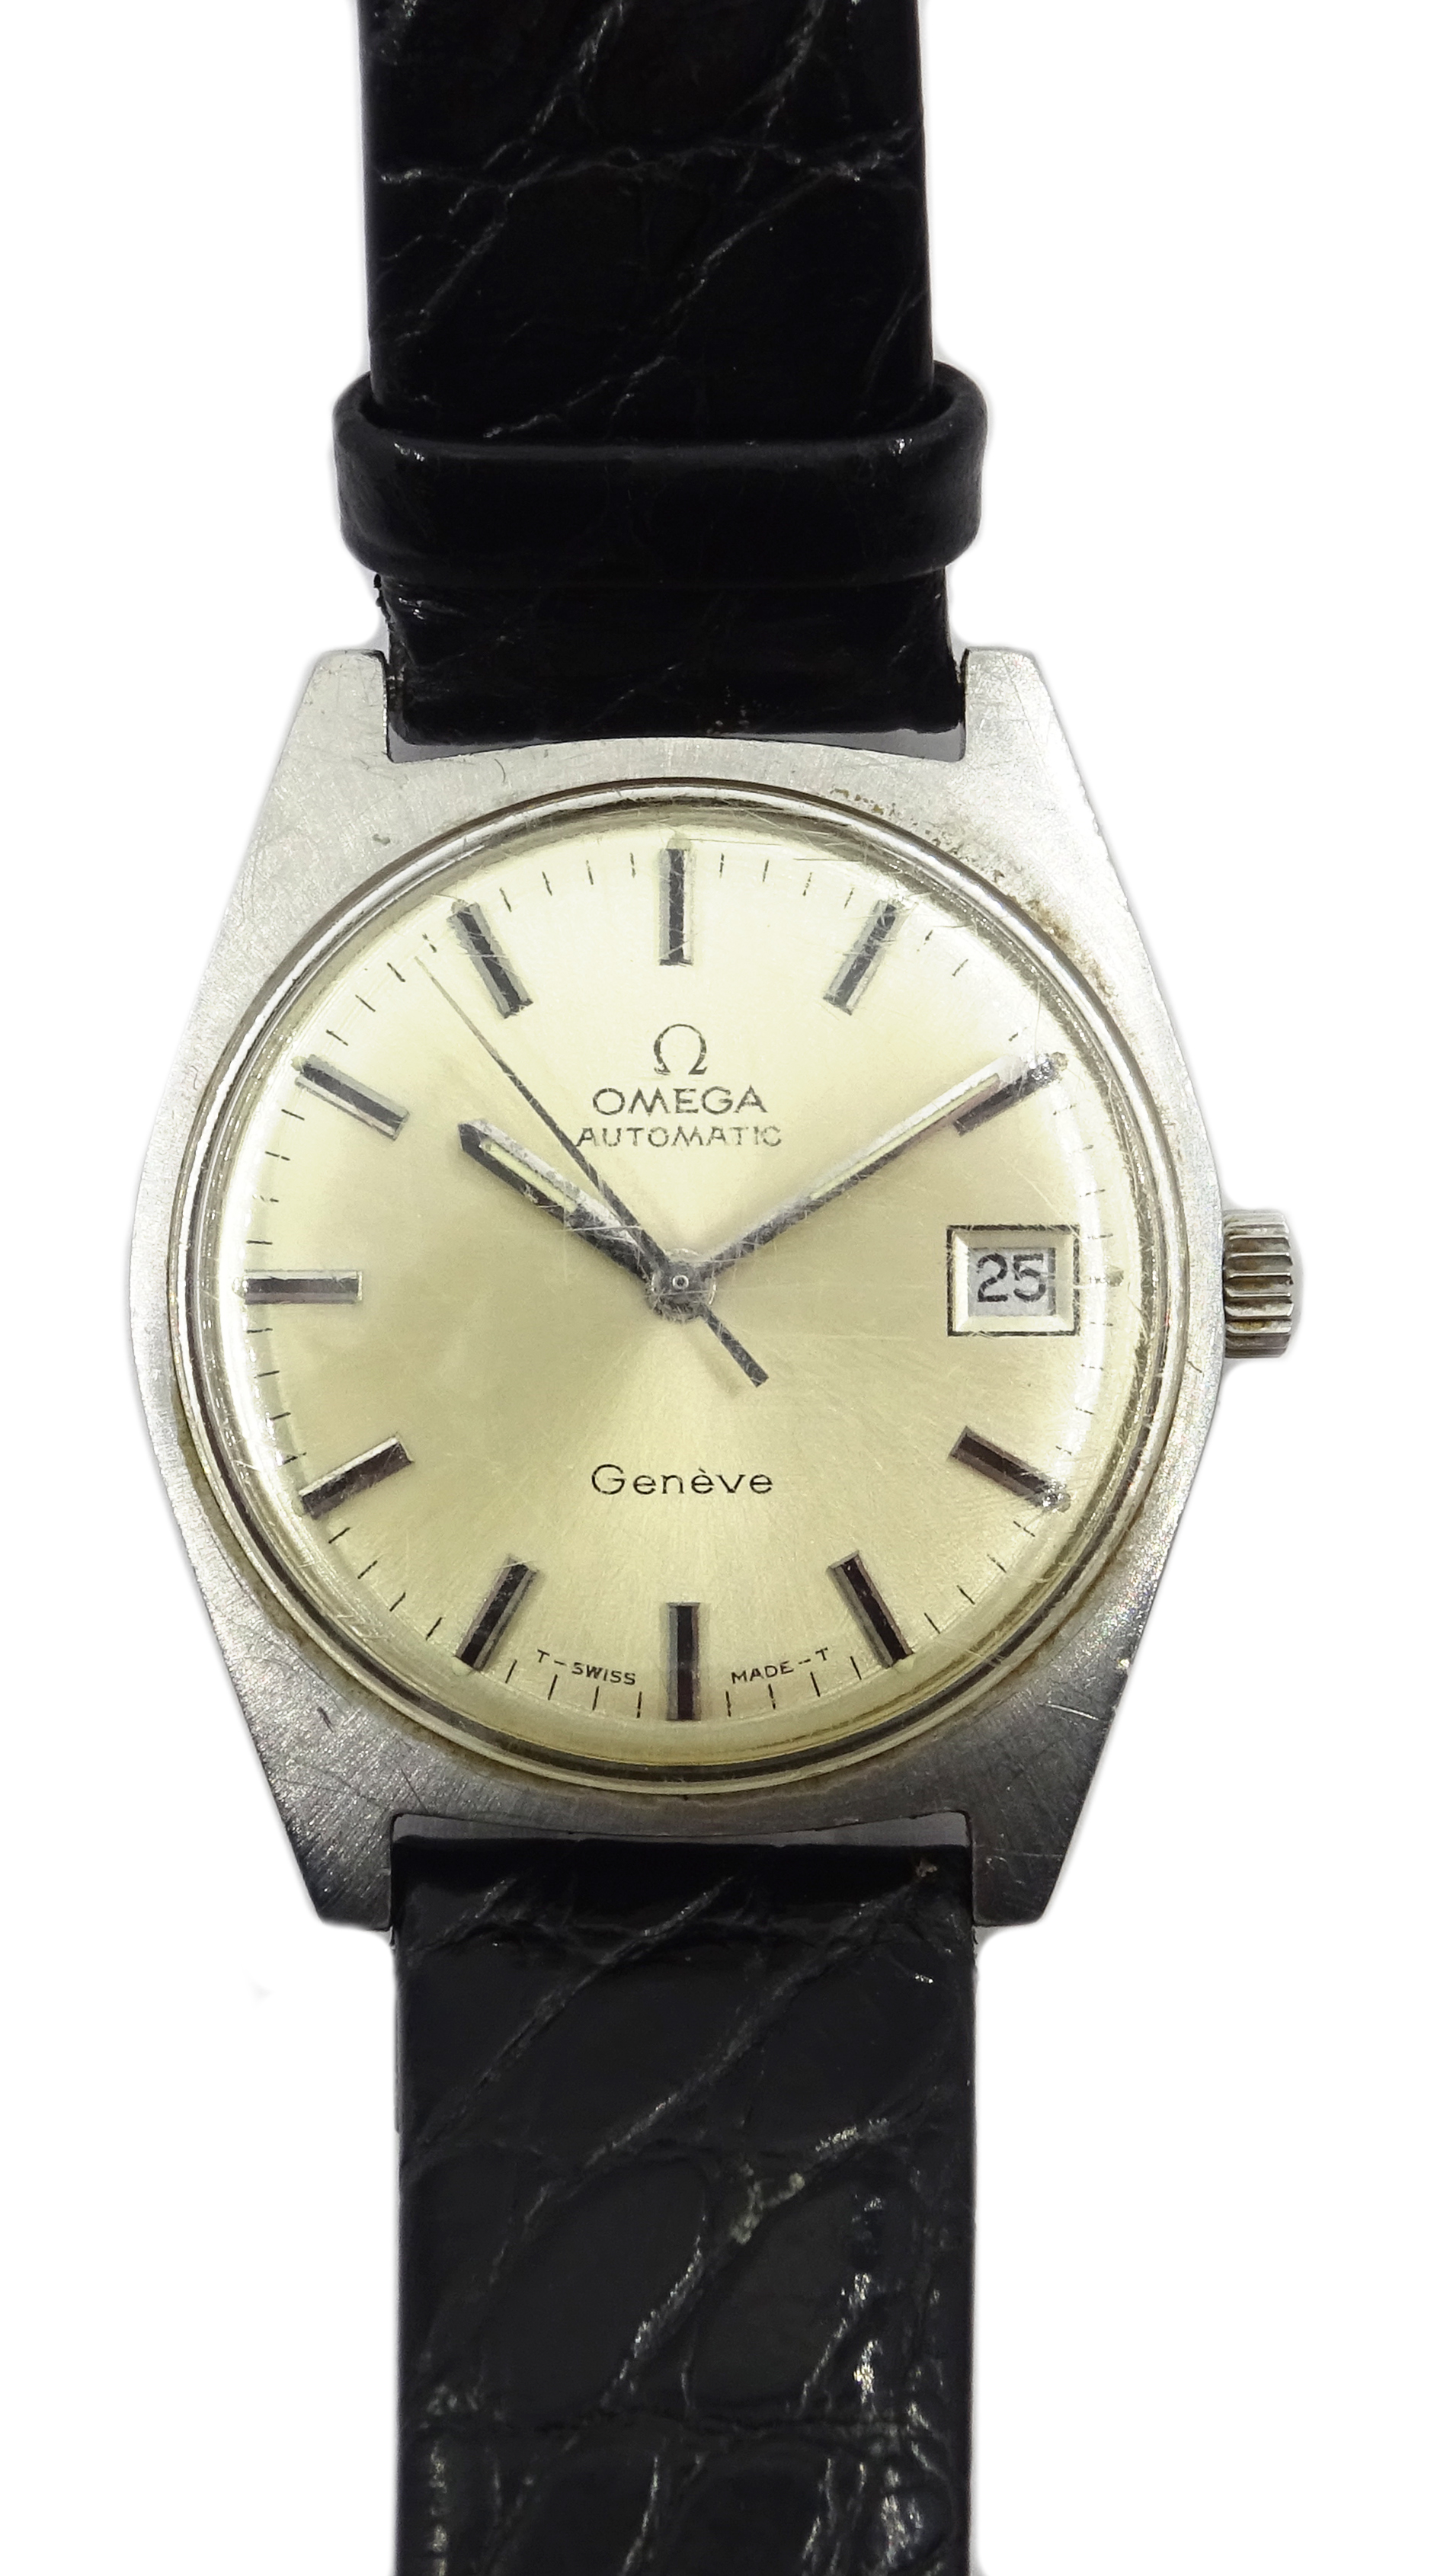 Omega Geneve automatic, gentleman's stainless steel wristwatch with